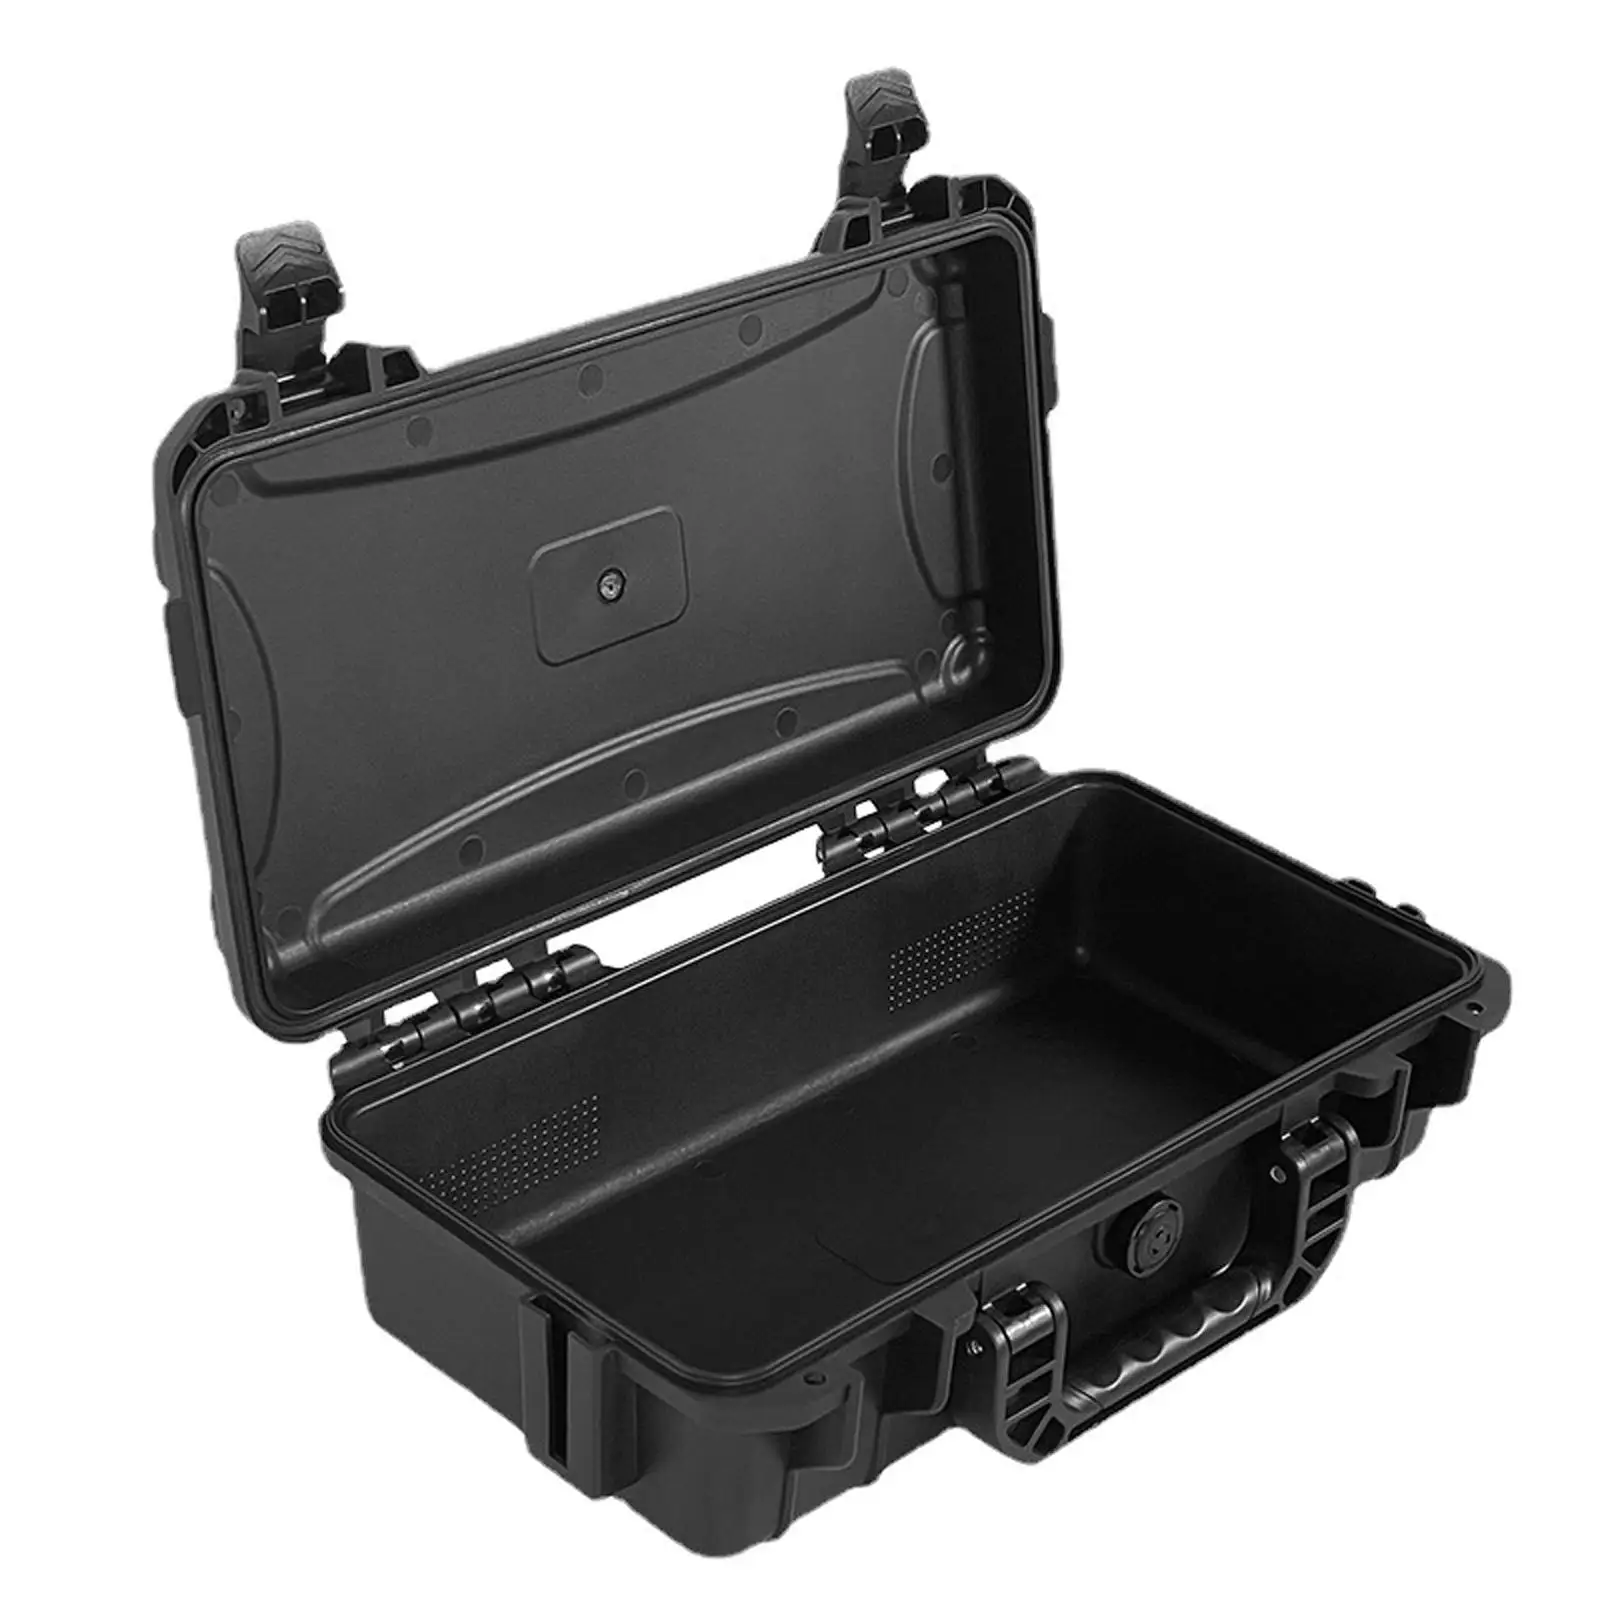 Shockproof Sealed Box carry tools Case Outdoor Transport Case Tool Box Outdoor Storage Case for Electronics Transportation